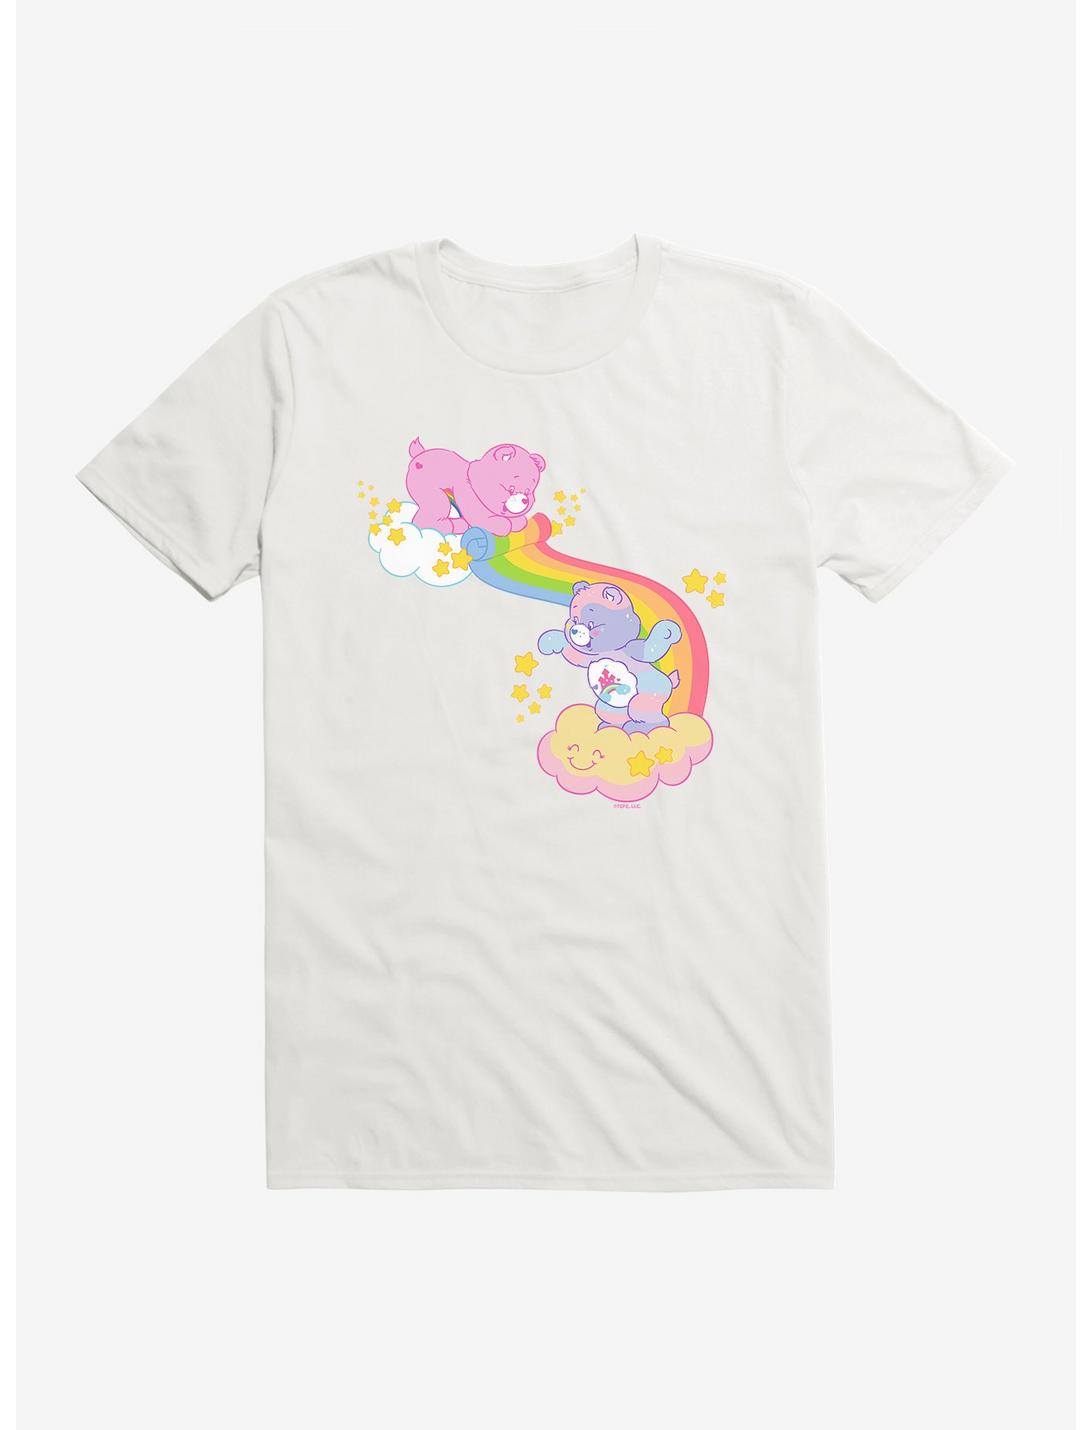 Care Bears In The Clouds T-Shirt, WHITE, hi-res